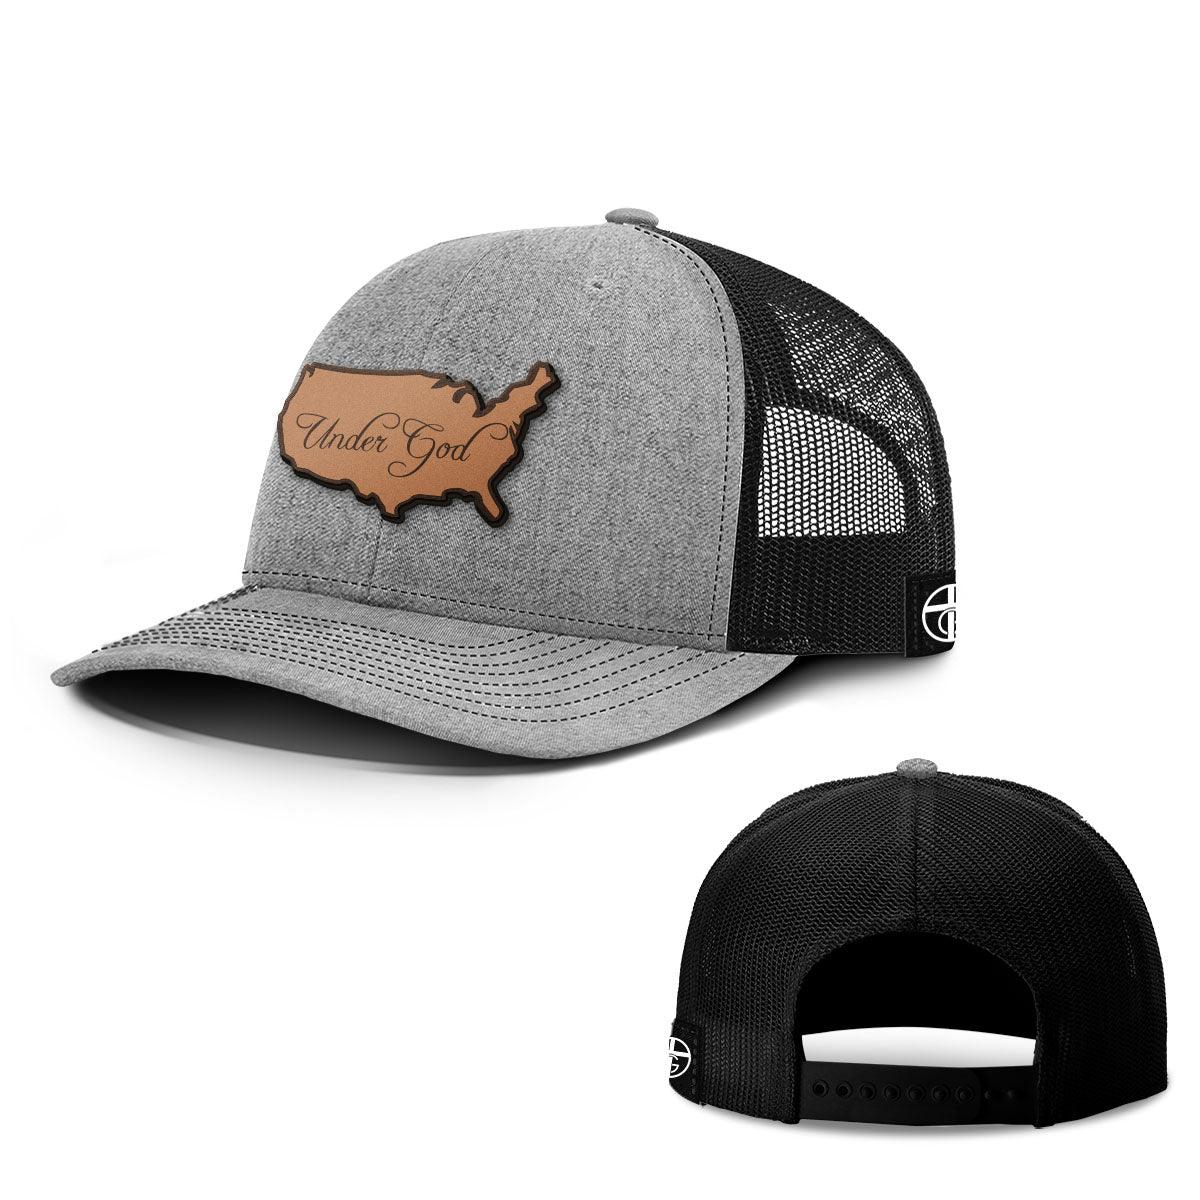 Under God Leather Patch Hats - Our True God